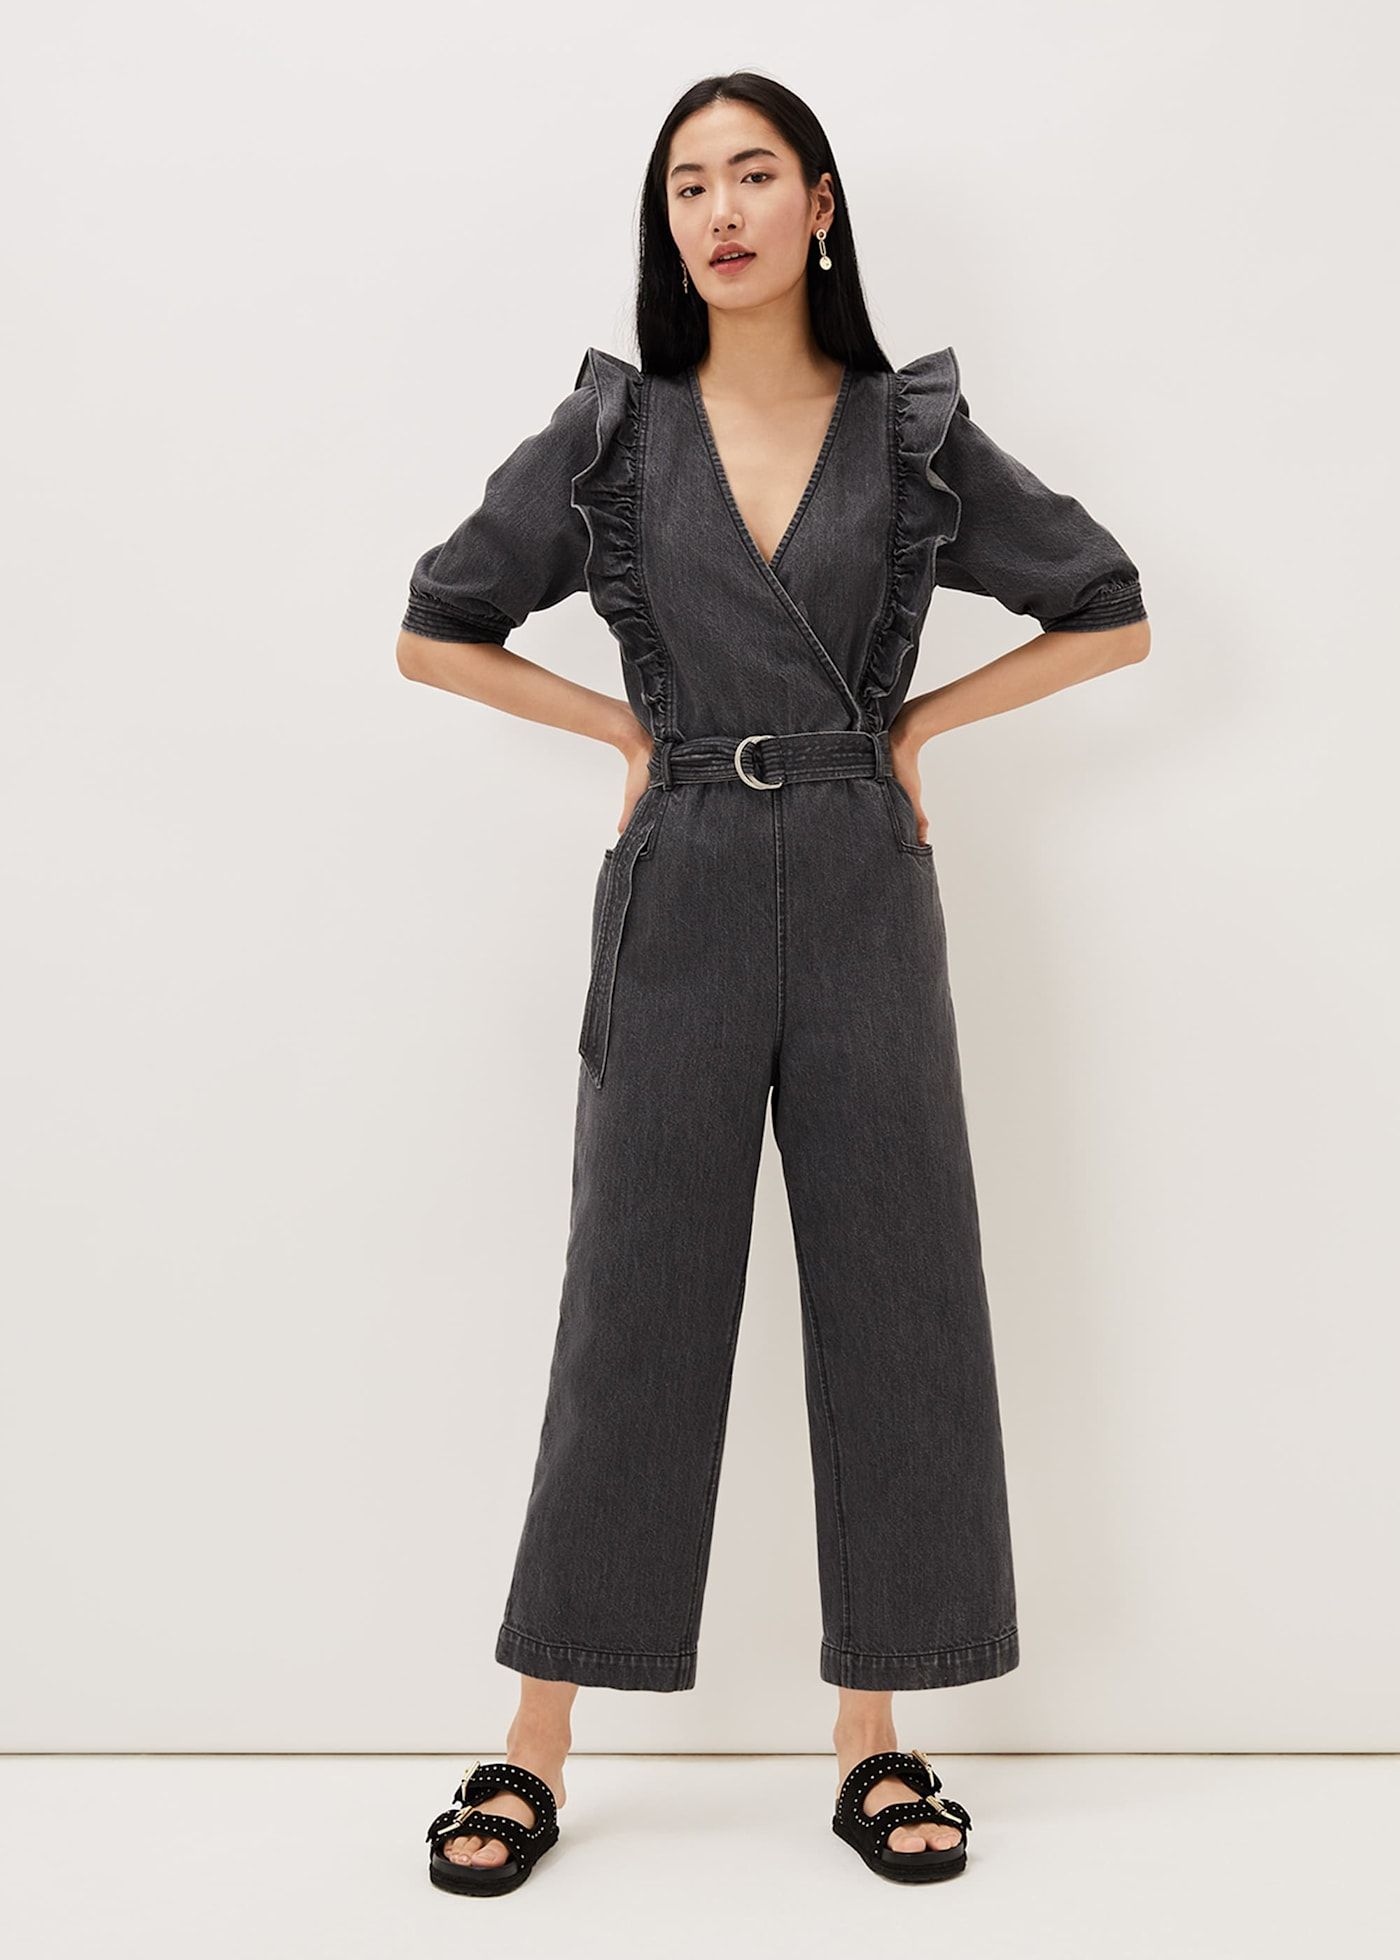 Our pick of the best jumpsuits